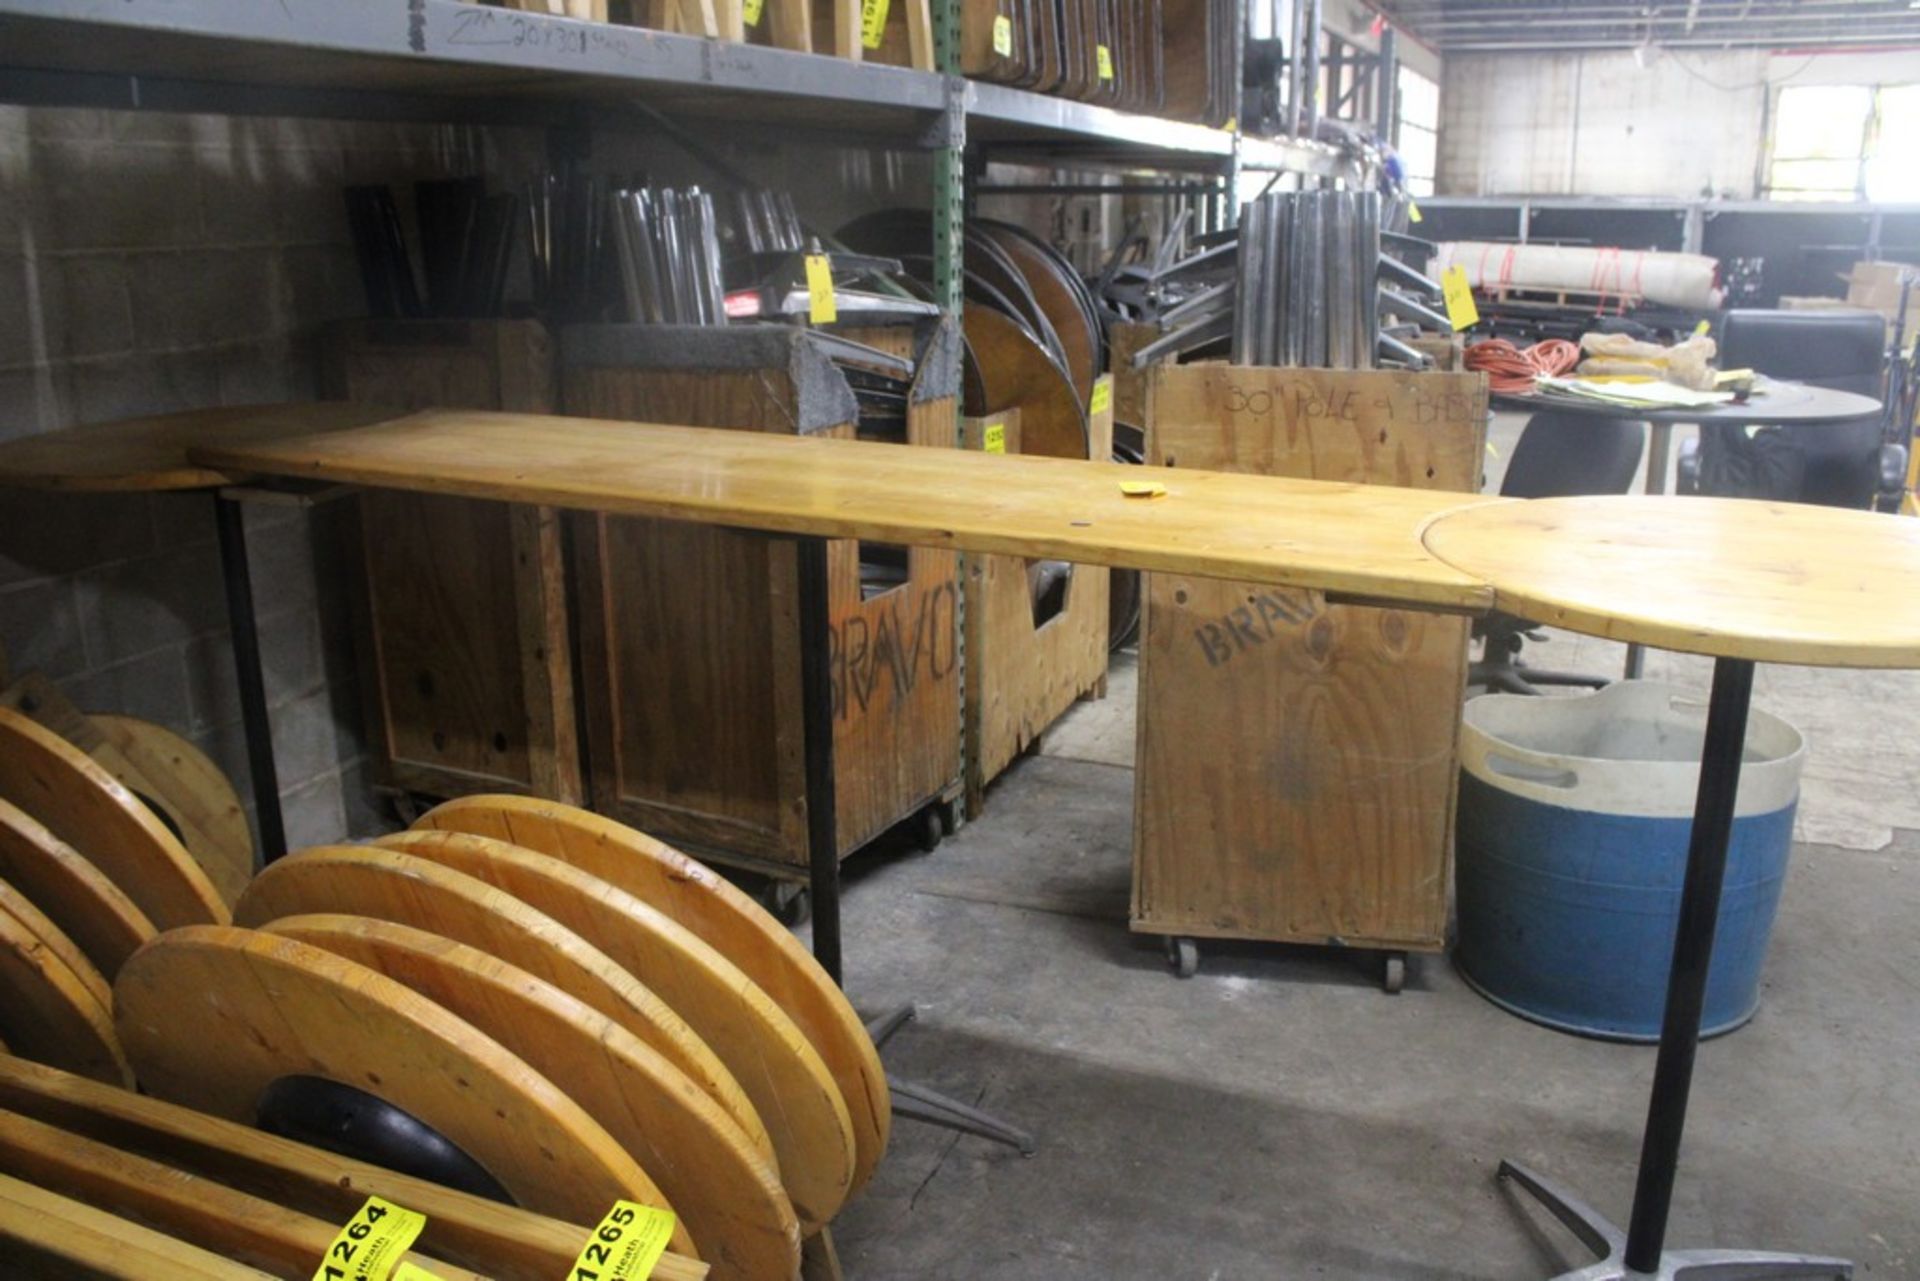 THREE PIECE BISTRO BAR TOP, 130" X 30", WITH LEGS AND BASES